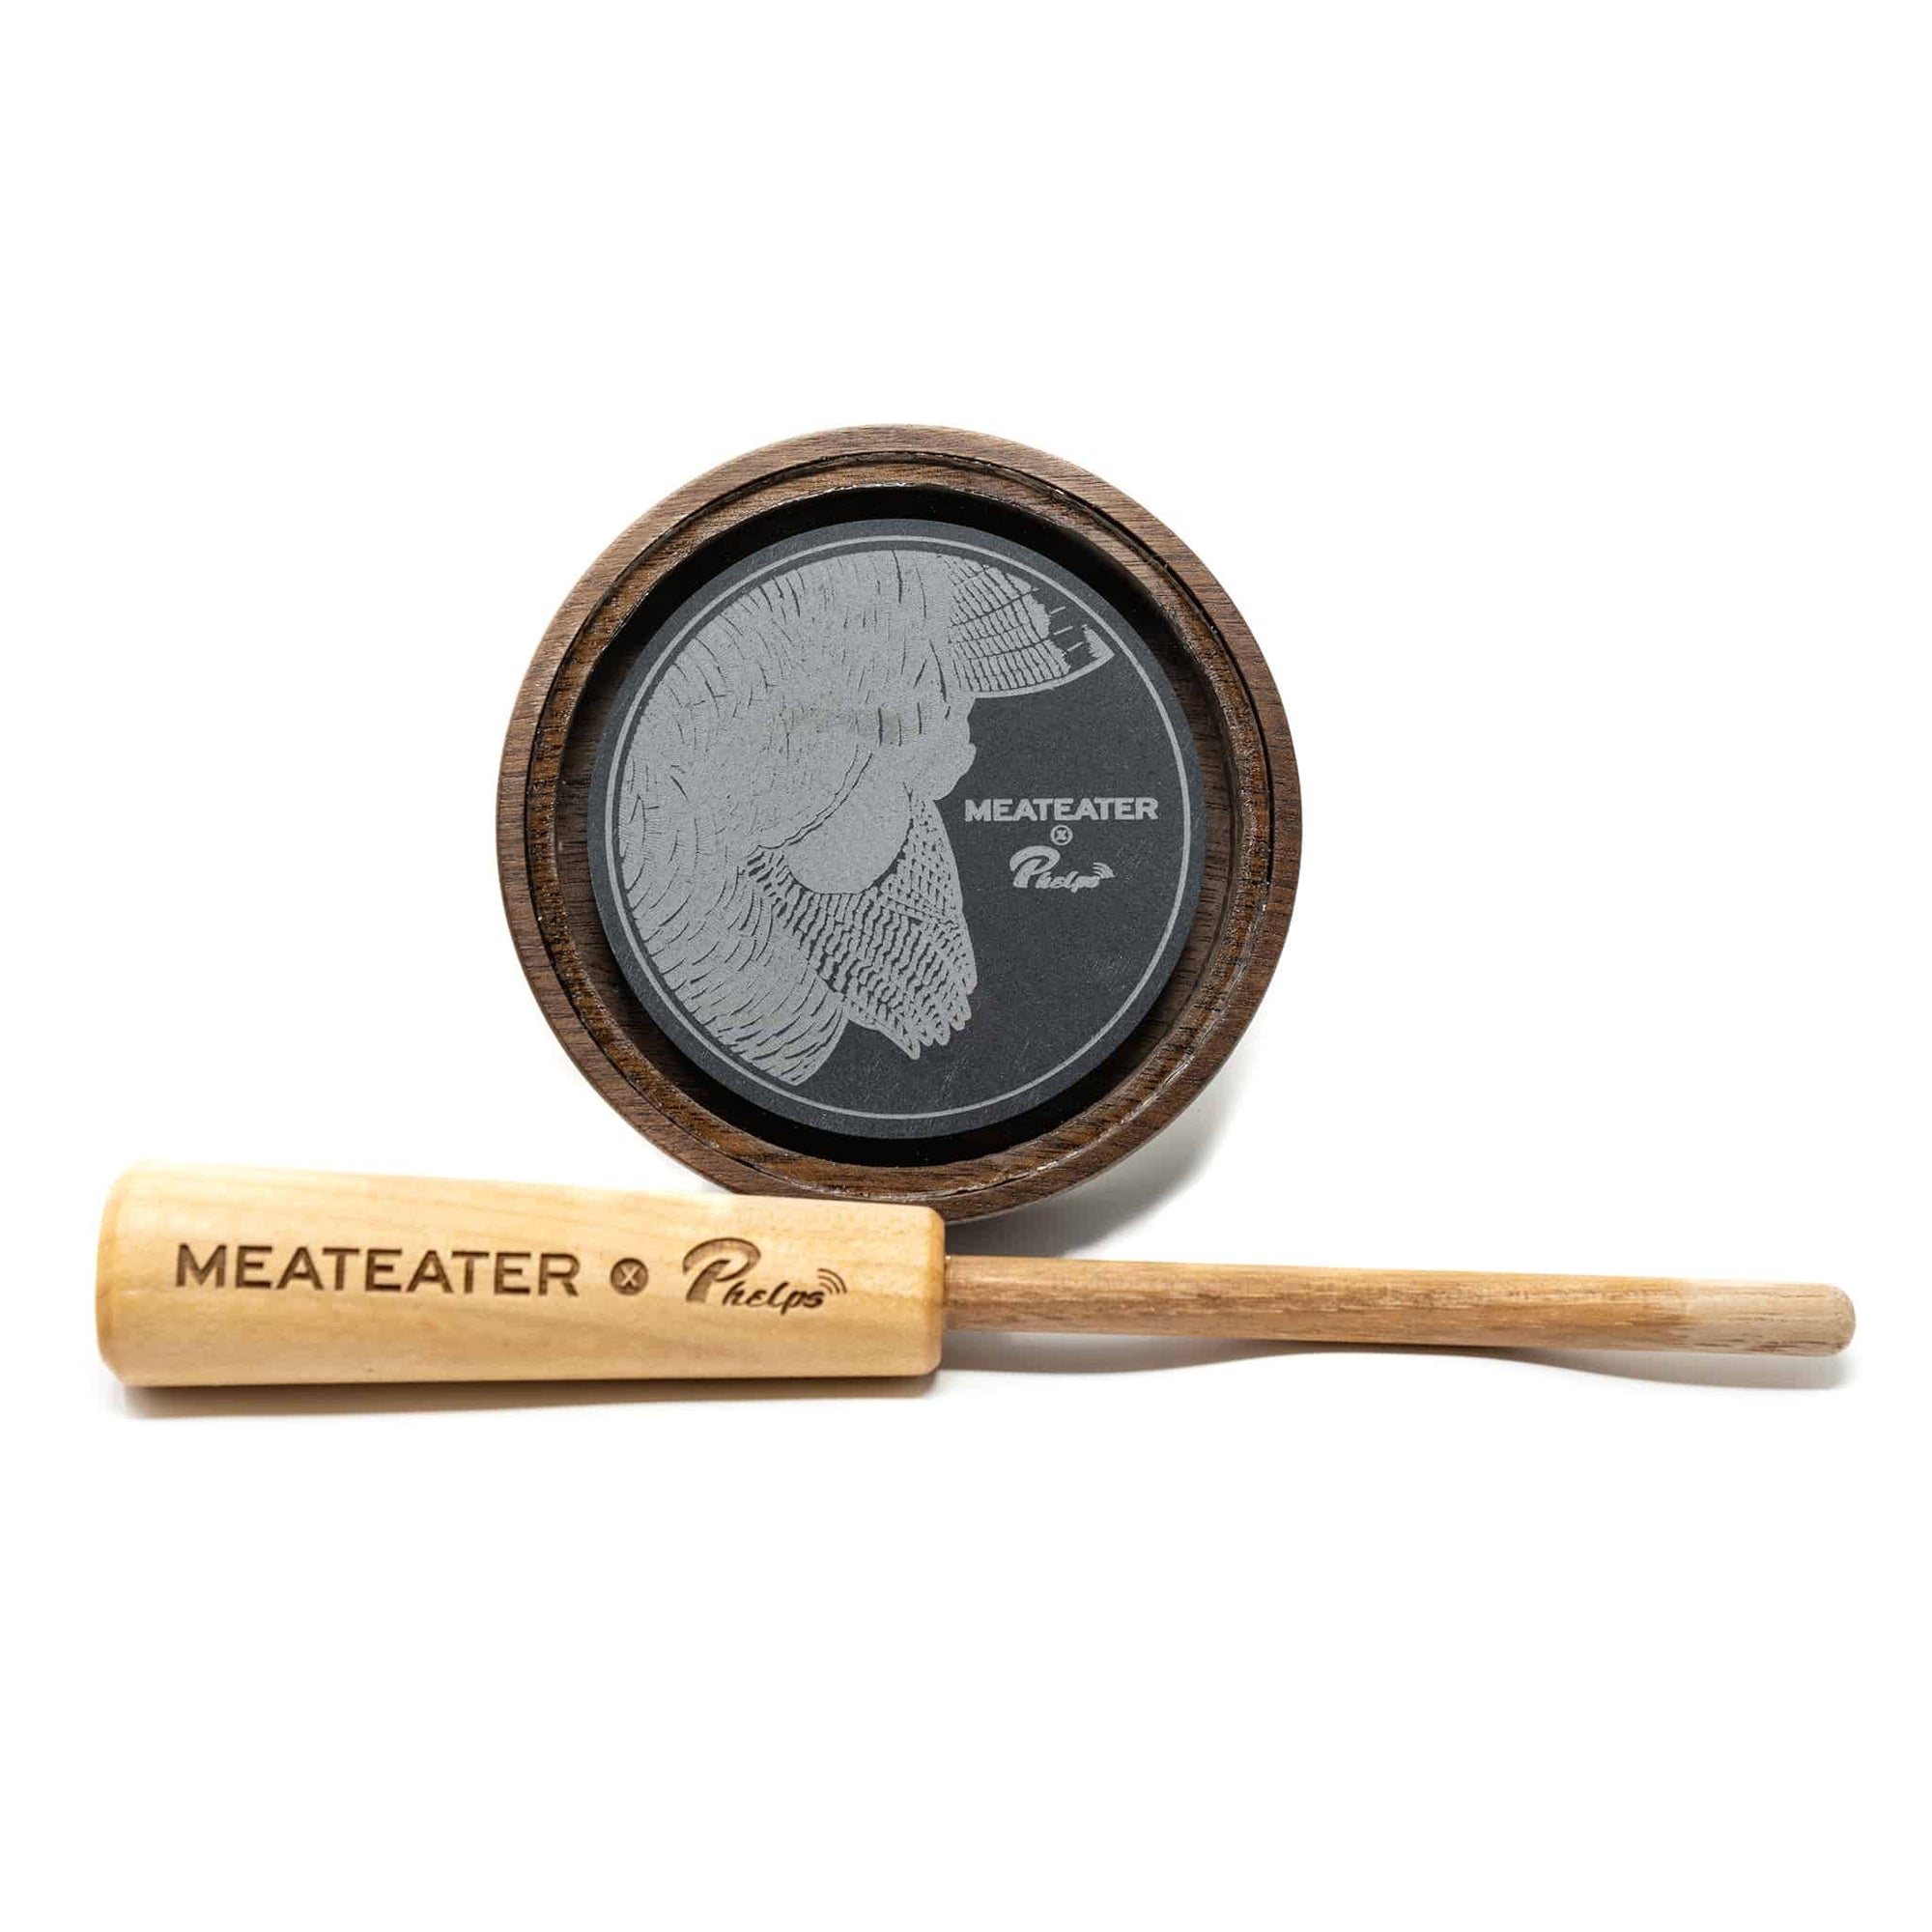 851182007567 meateater x phelps game calls crystal over slate turkey pot call